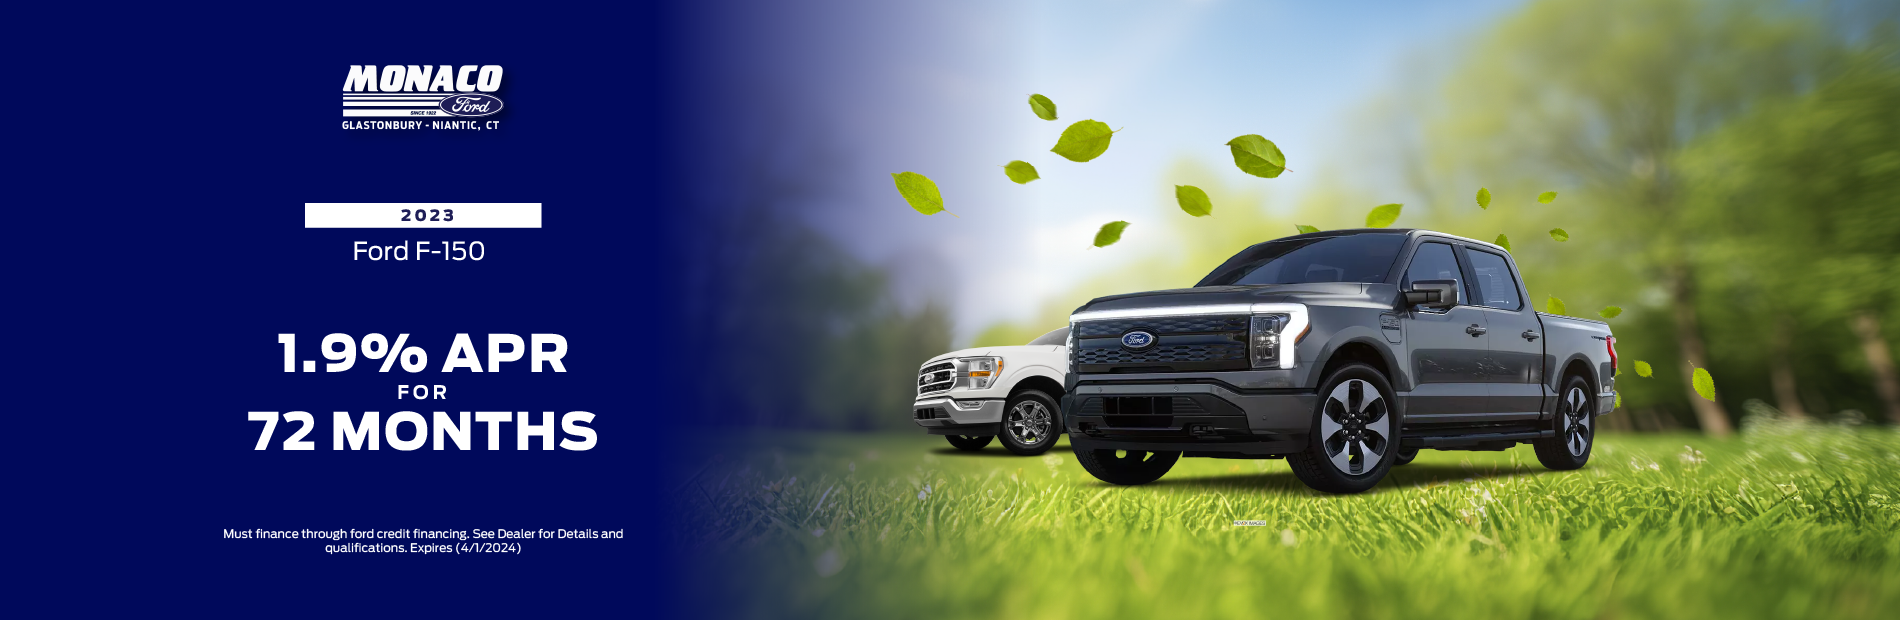 2023 Ford F-150 Truck 1.9% APR for 72 Months. 